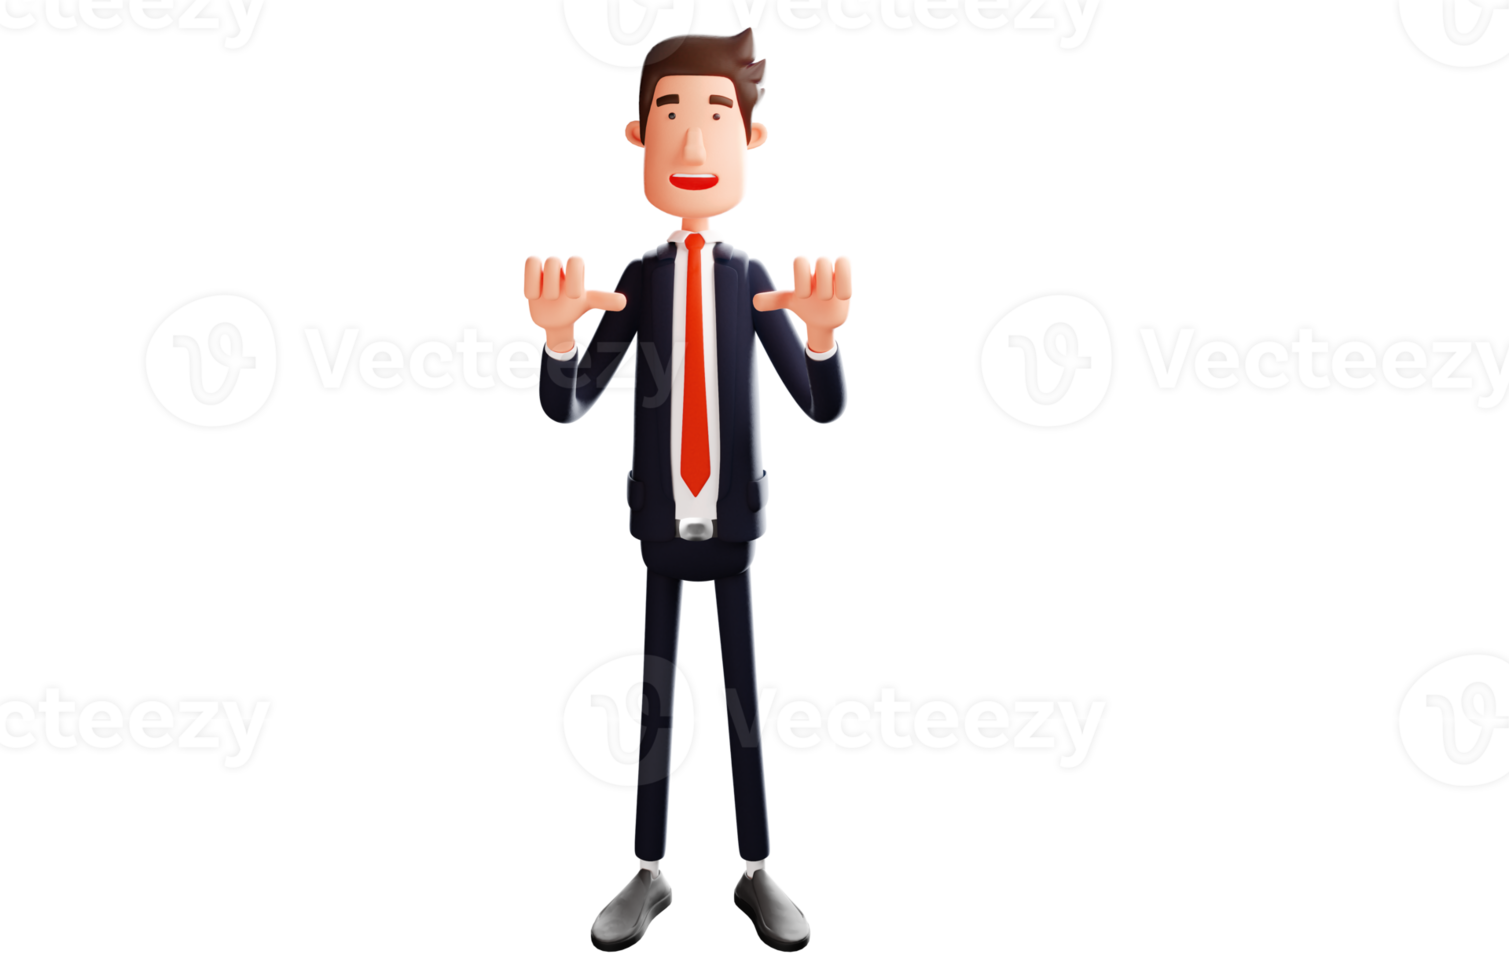 3D illustration. Arrogant office worker 3D Cartoon Character. Worker cartoon standing and giving two thumbs down sign. 3D Cartoon Character png